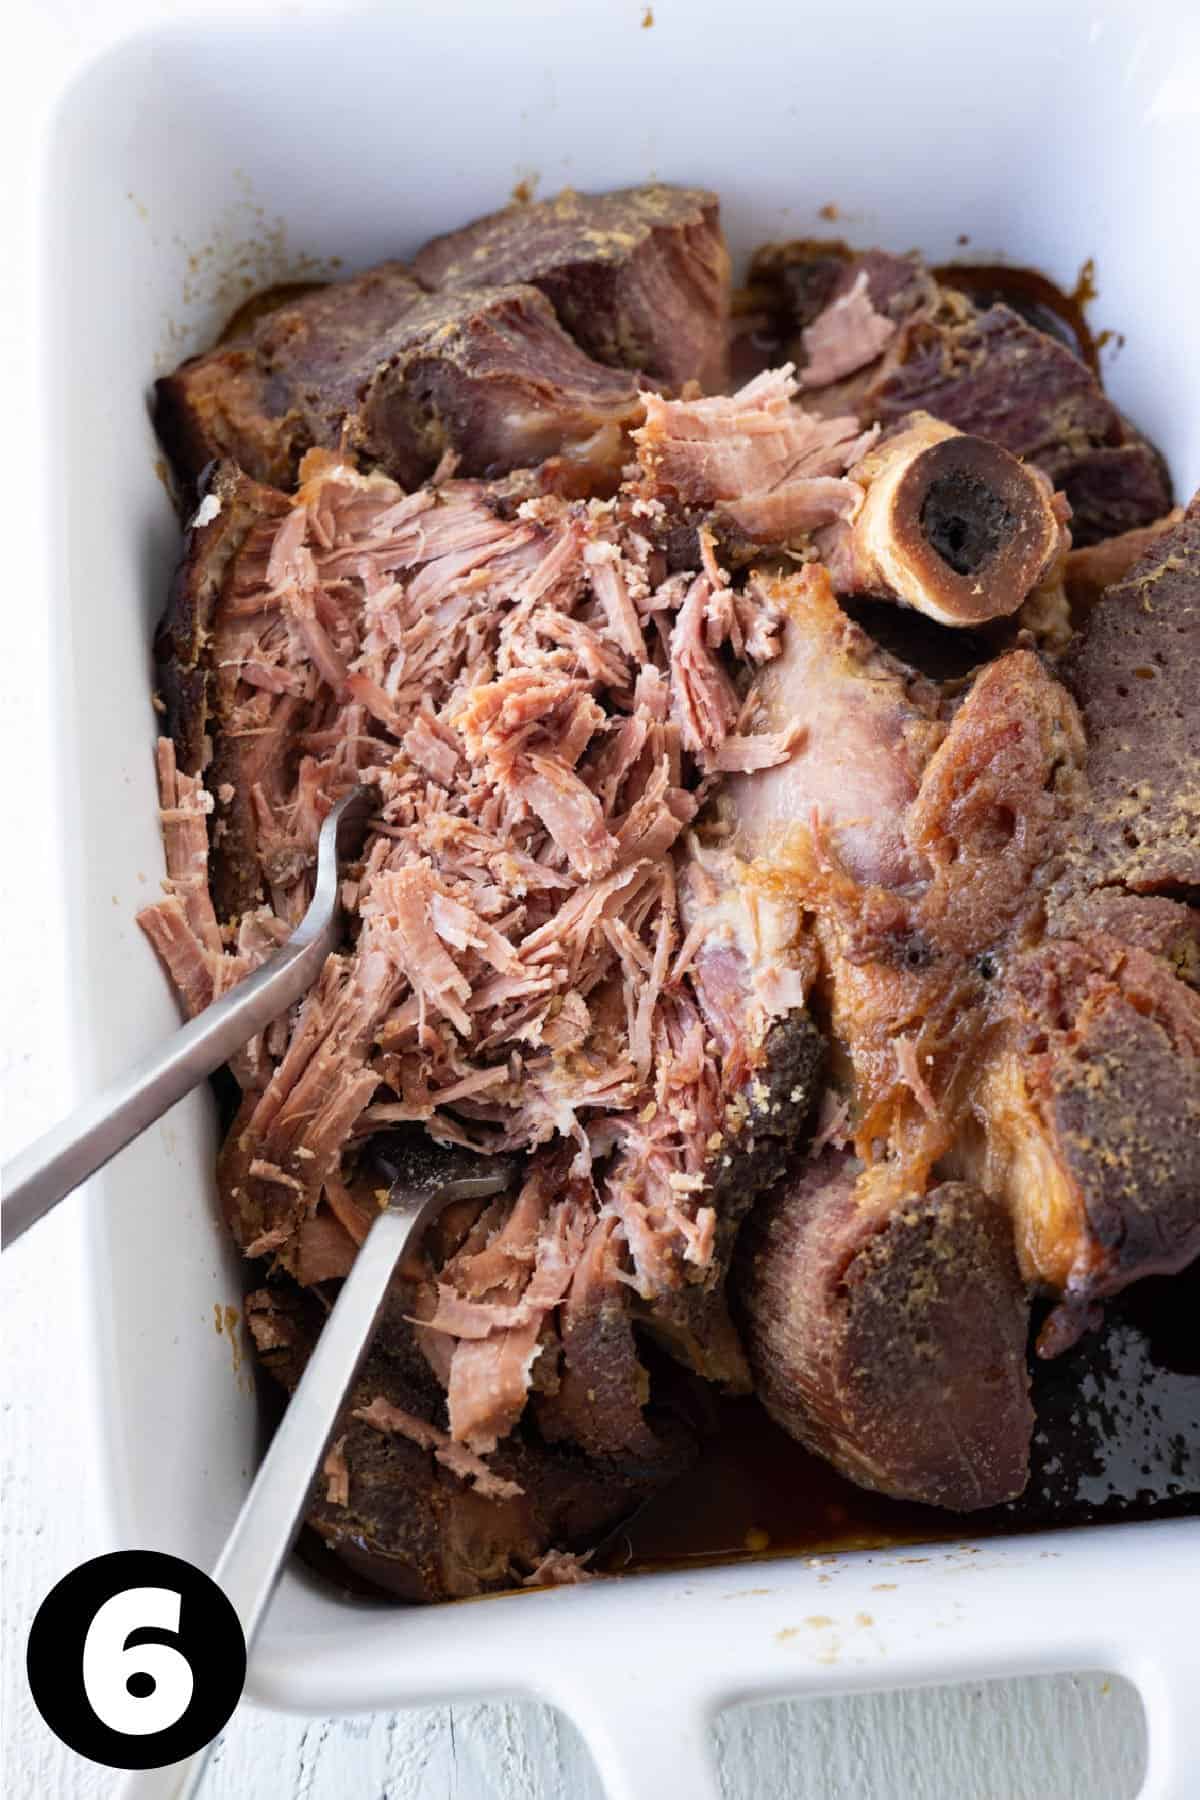 Shredded ham in a baking dish with two forks.